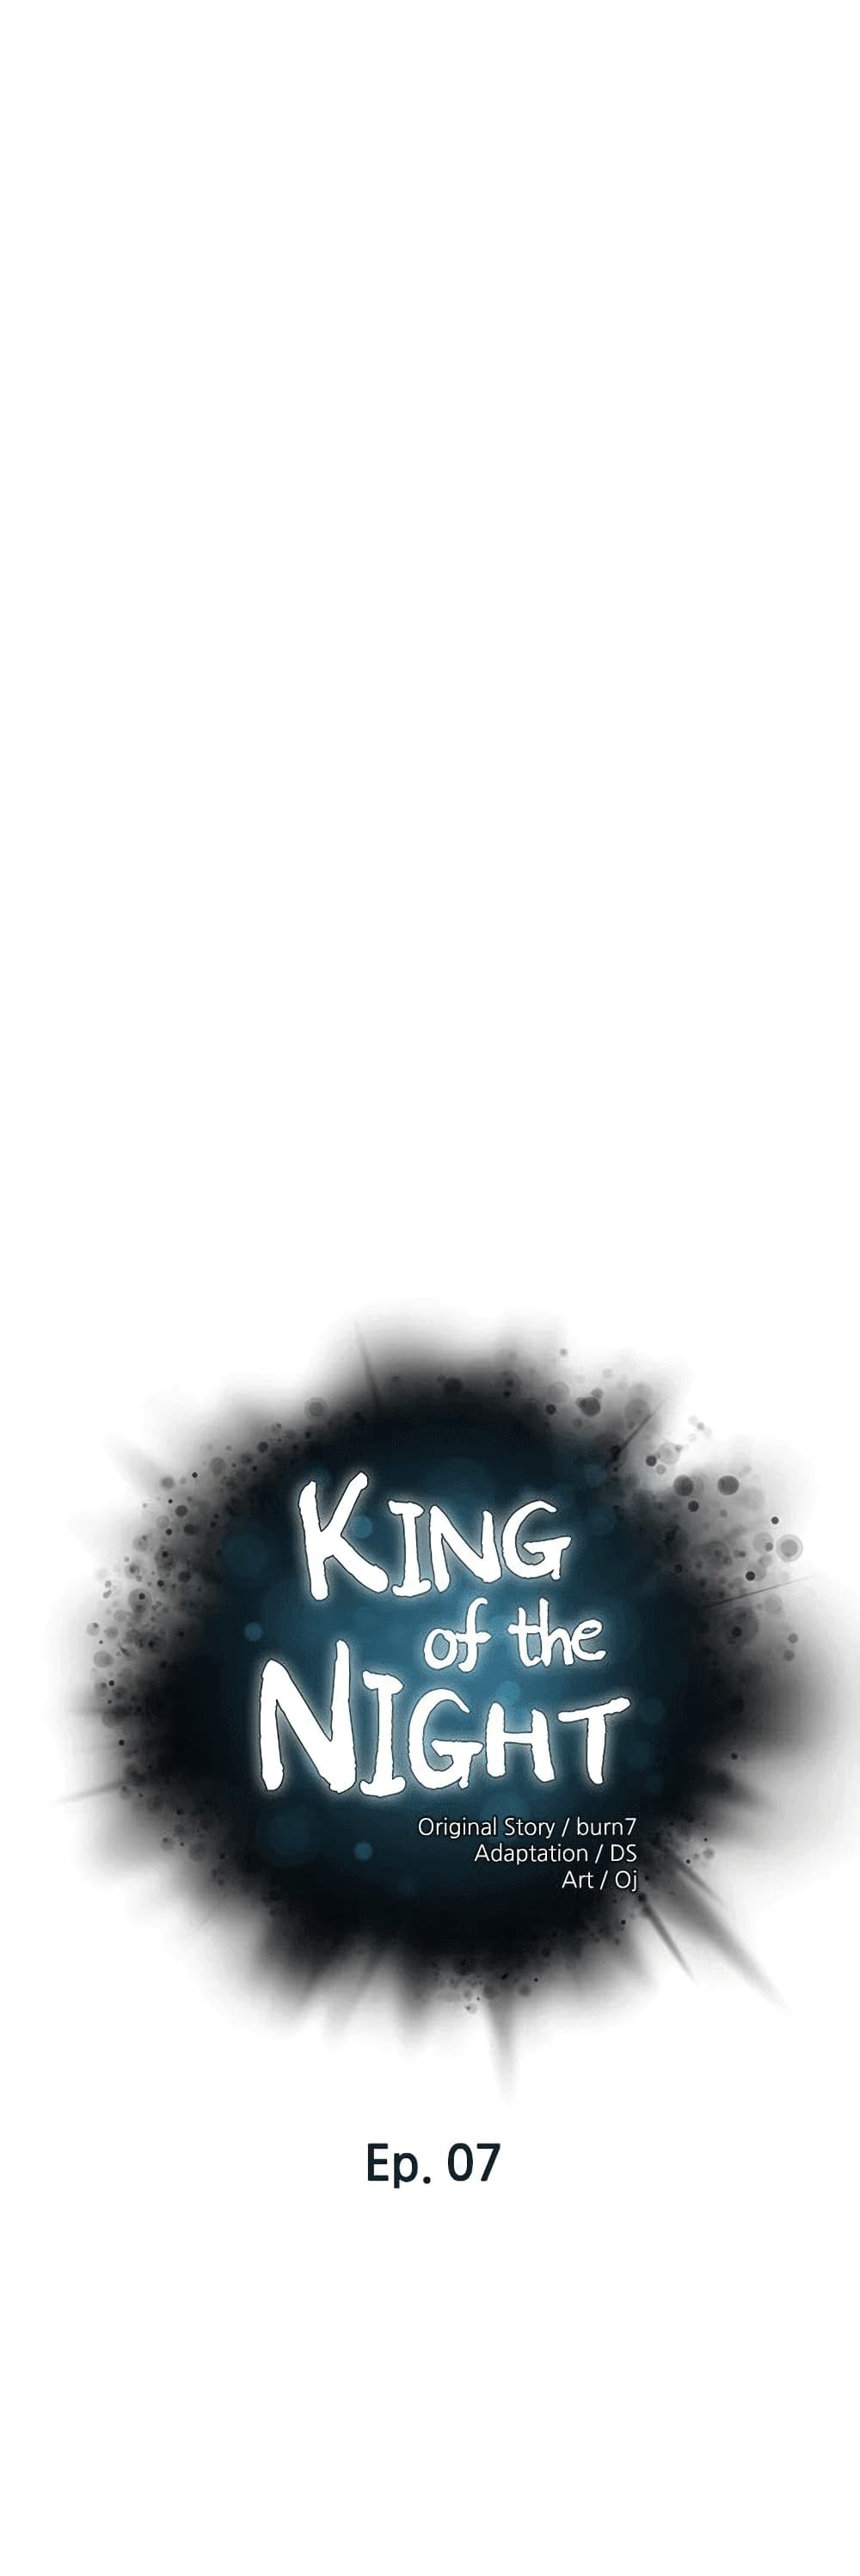 King of the Night 7 01